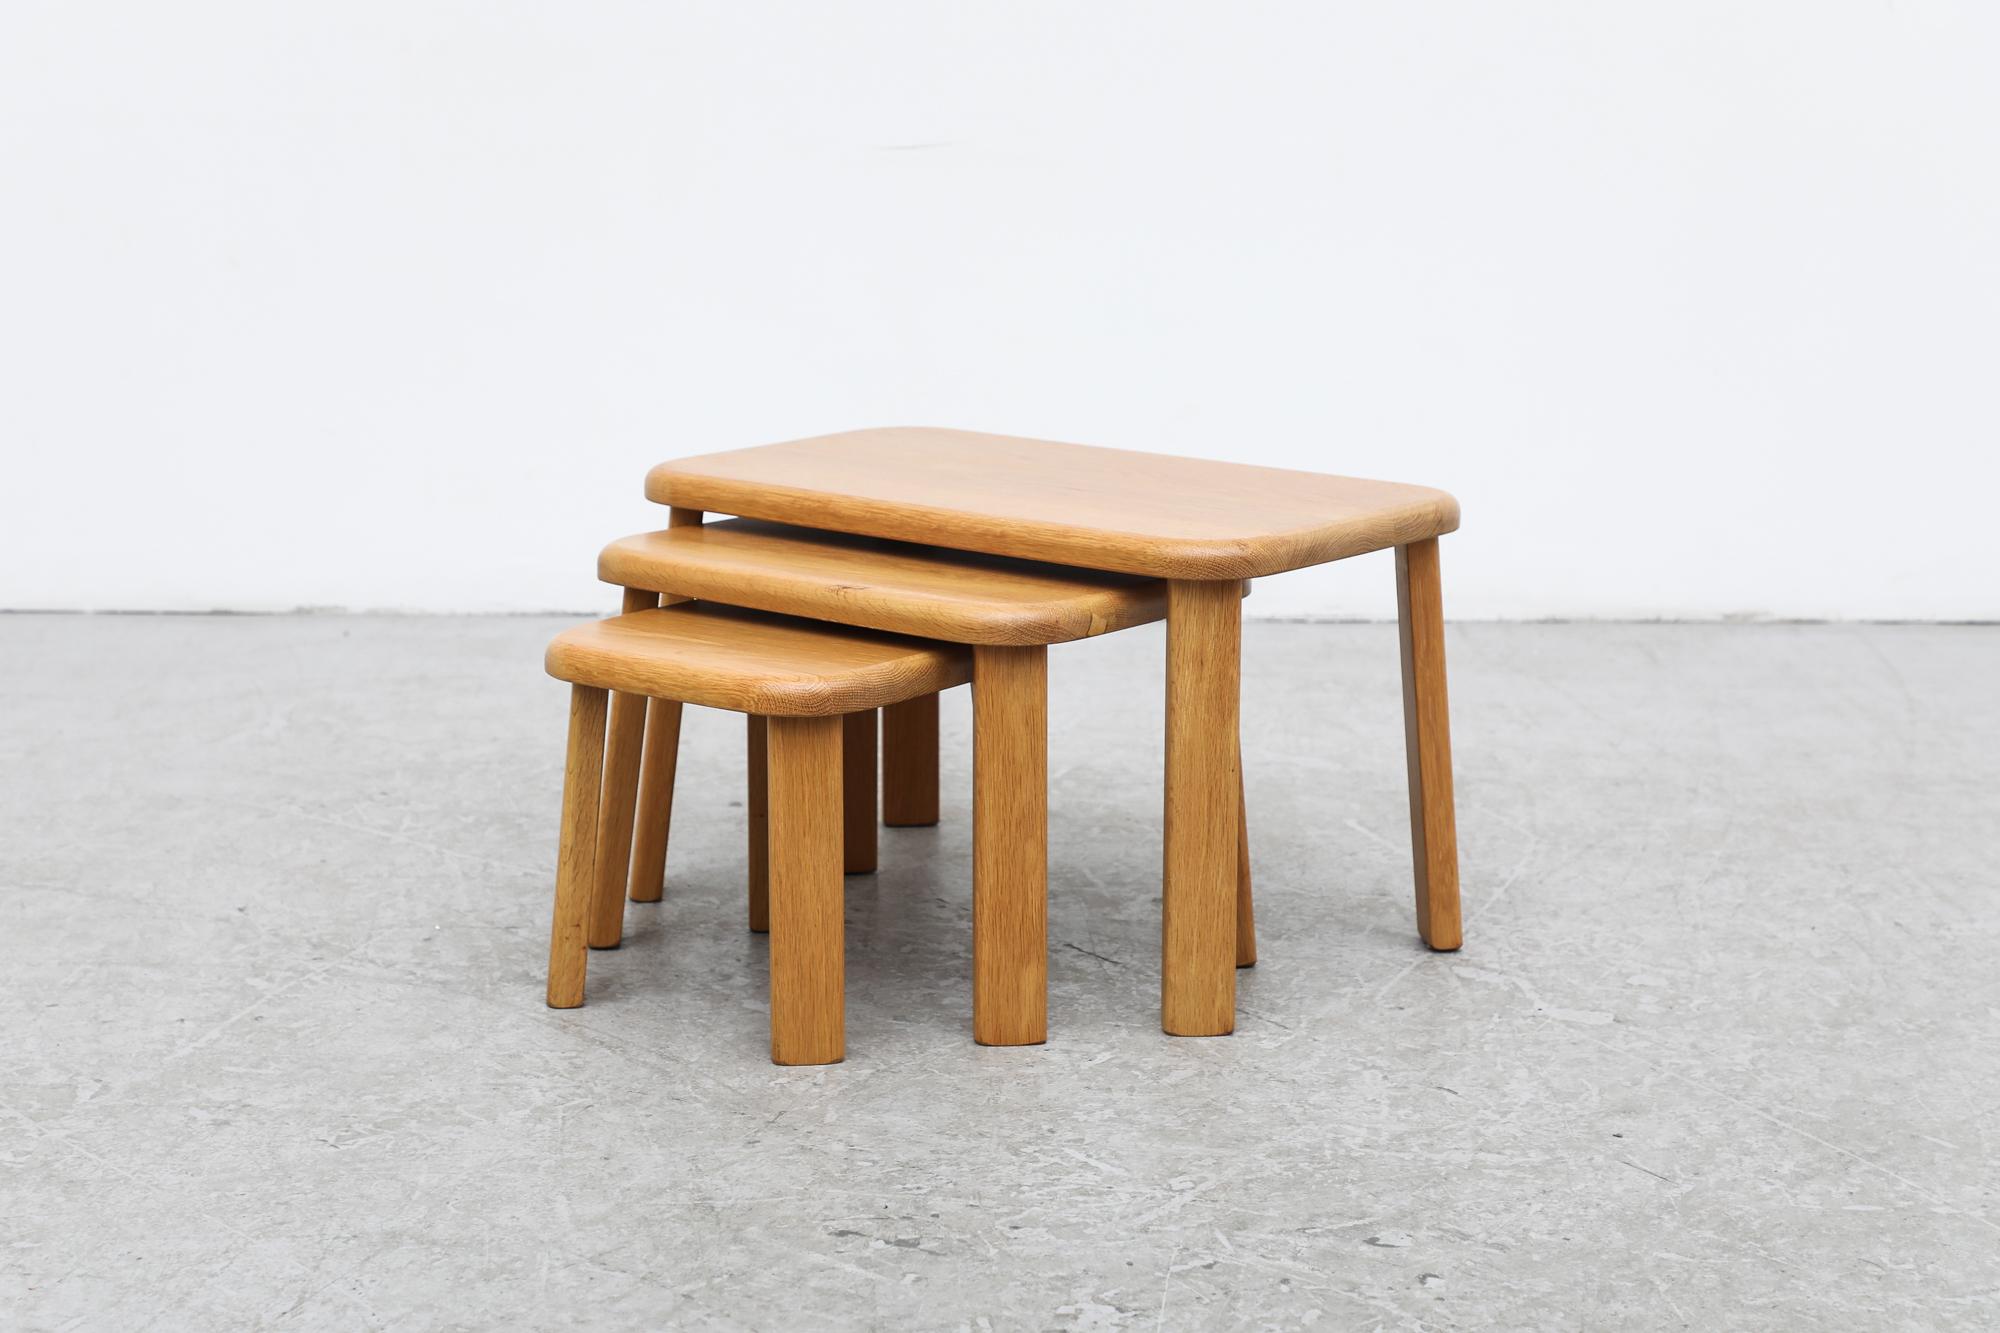 Dutch Set of 3 Charlotte Perriand Inspired Natural Oak Nesting Tables w/ Rounded Edges For Sale